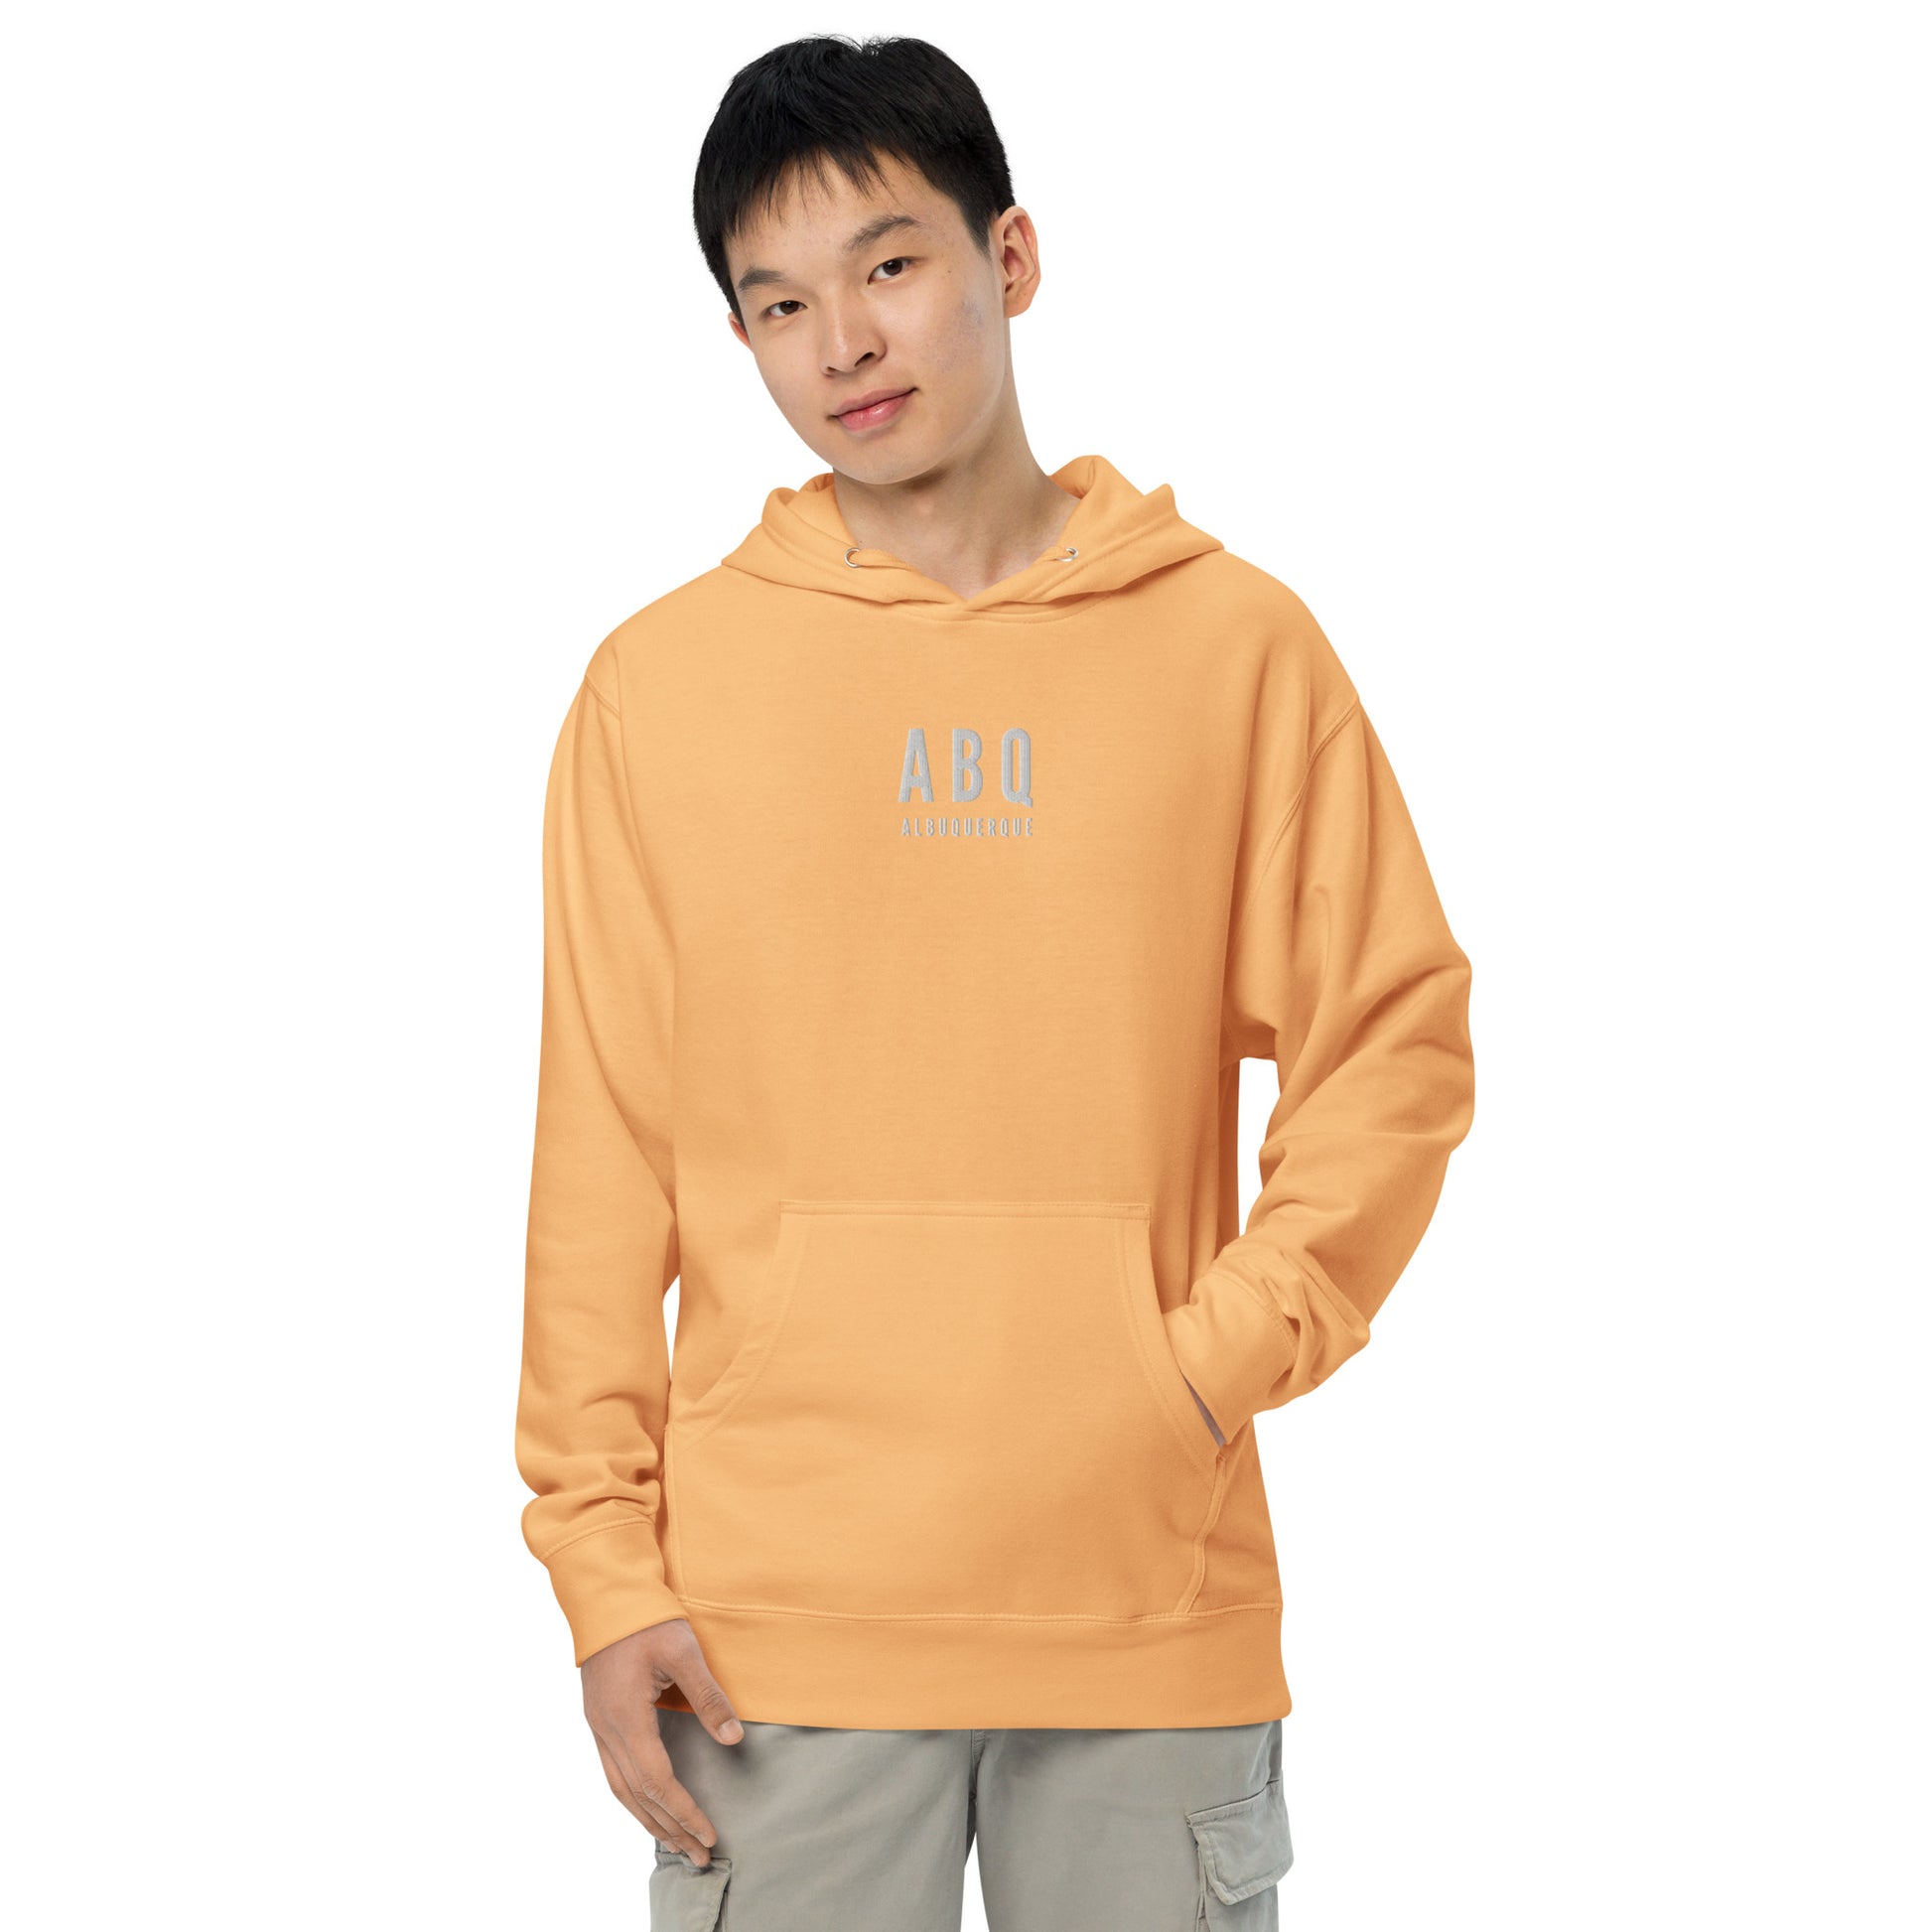 City Midweight Hoodie - White • ABQ Albuquerque • YHM Designs - Image 06